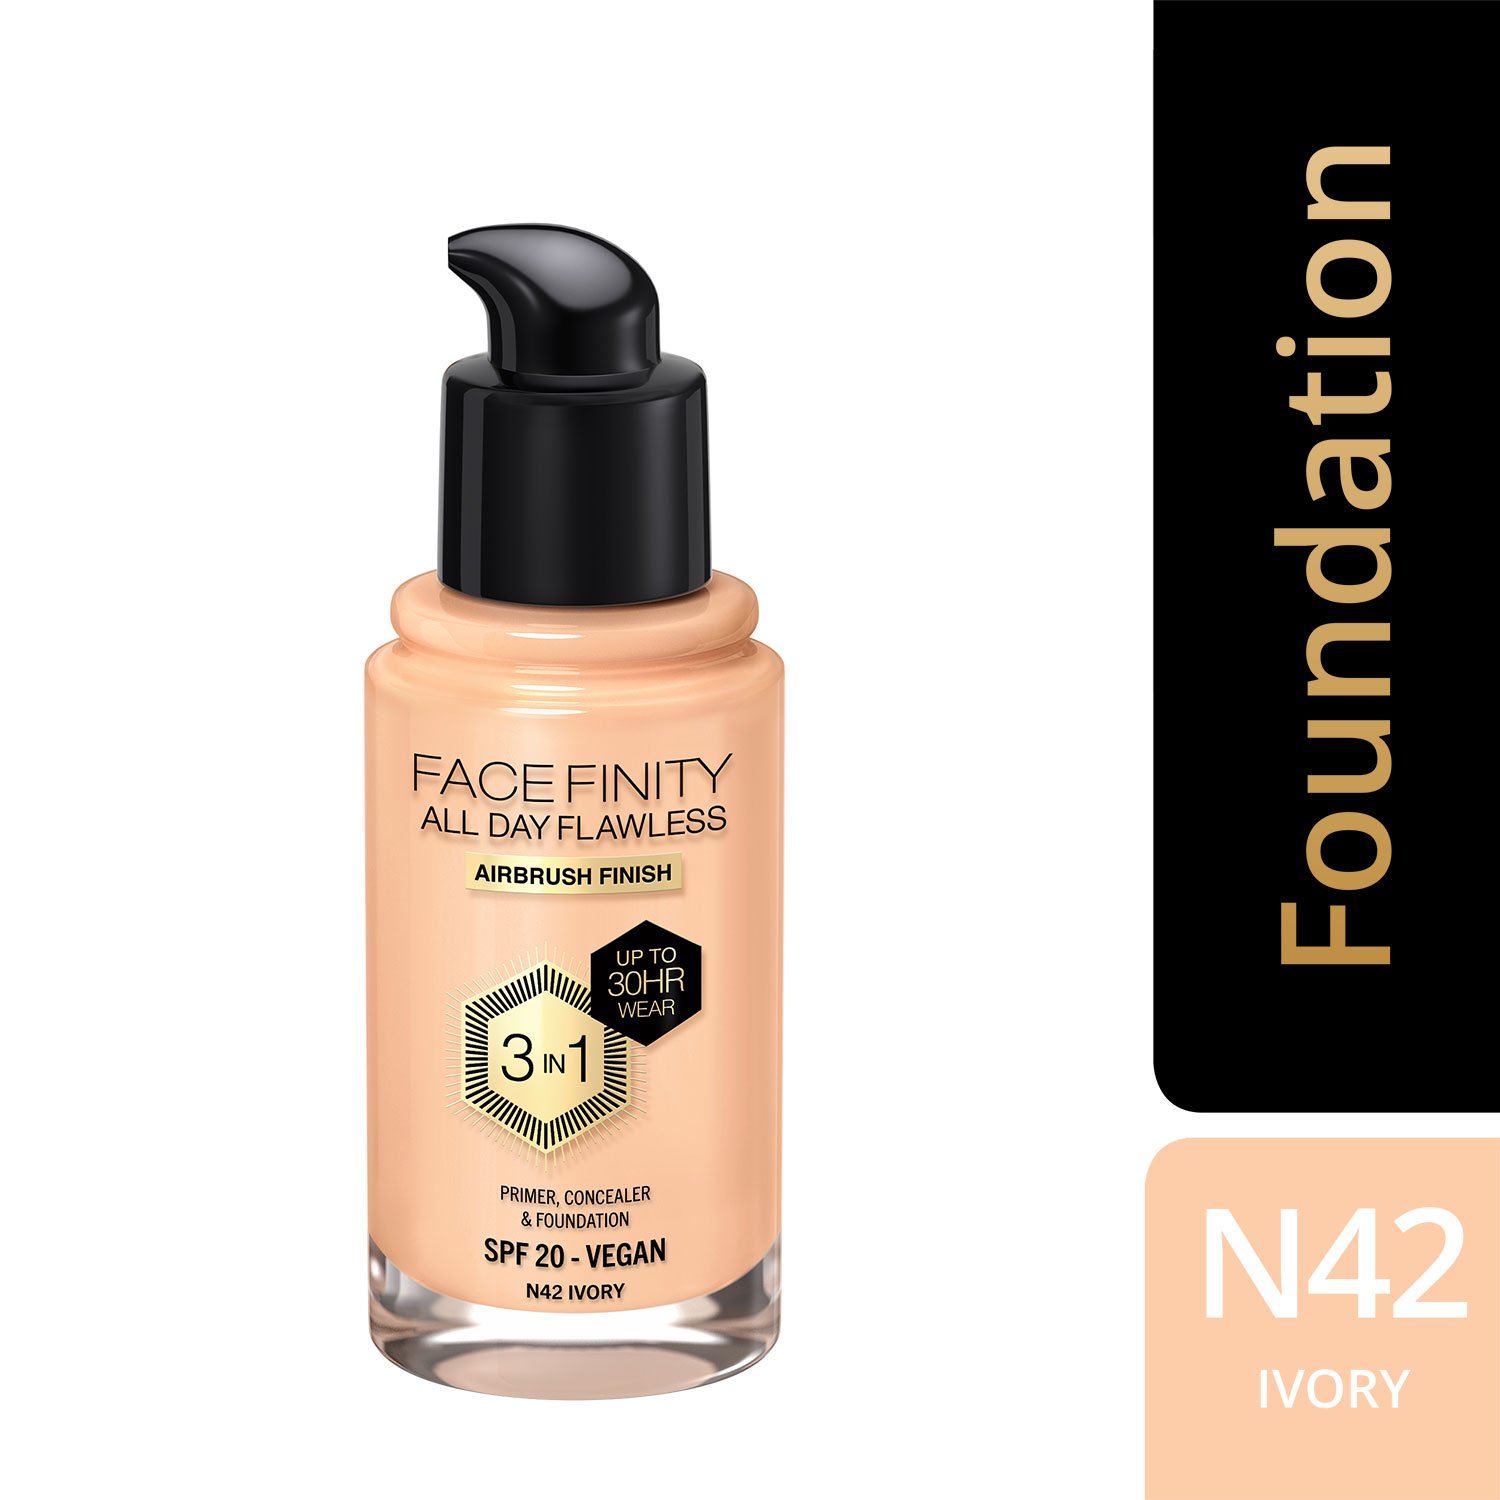 Тональная основа Max Factor Facefinity All Day Flawless 3 in 1 New тон N42 (Ivory) 30 мл - фото 3